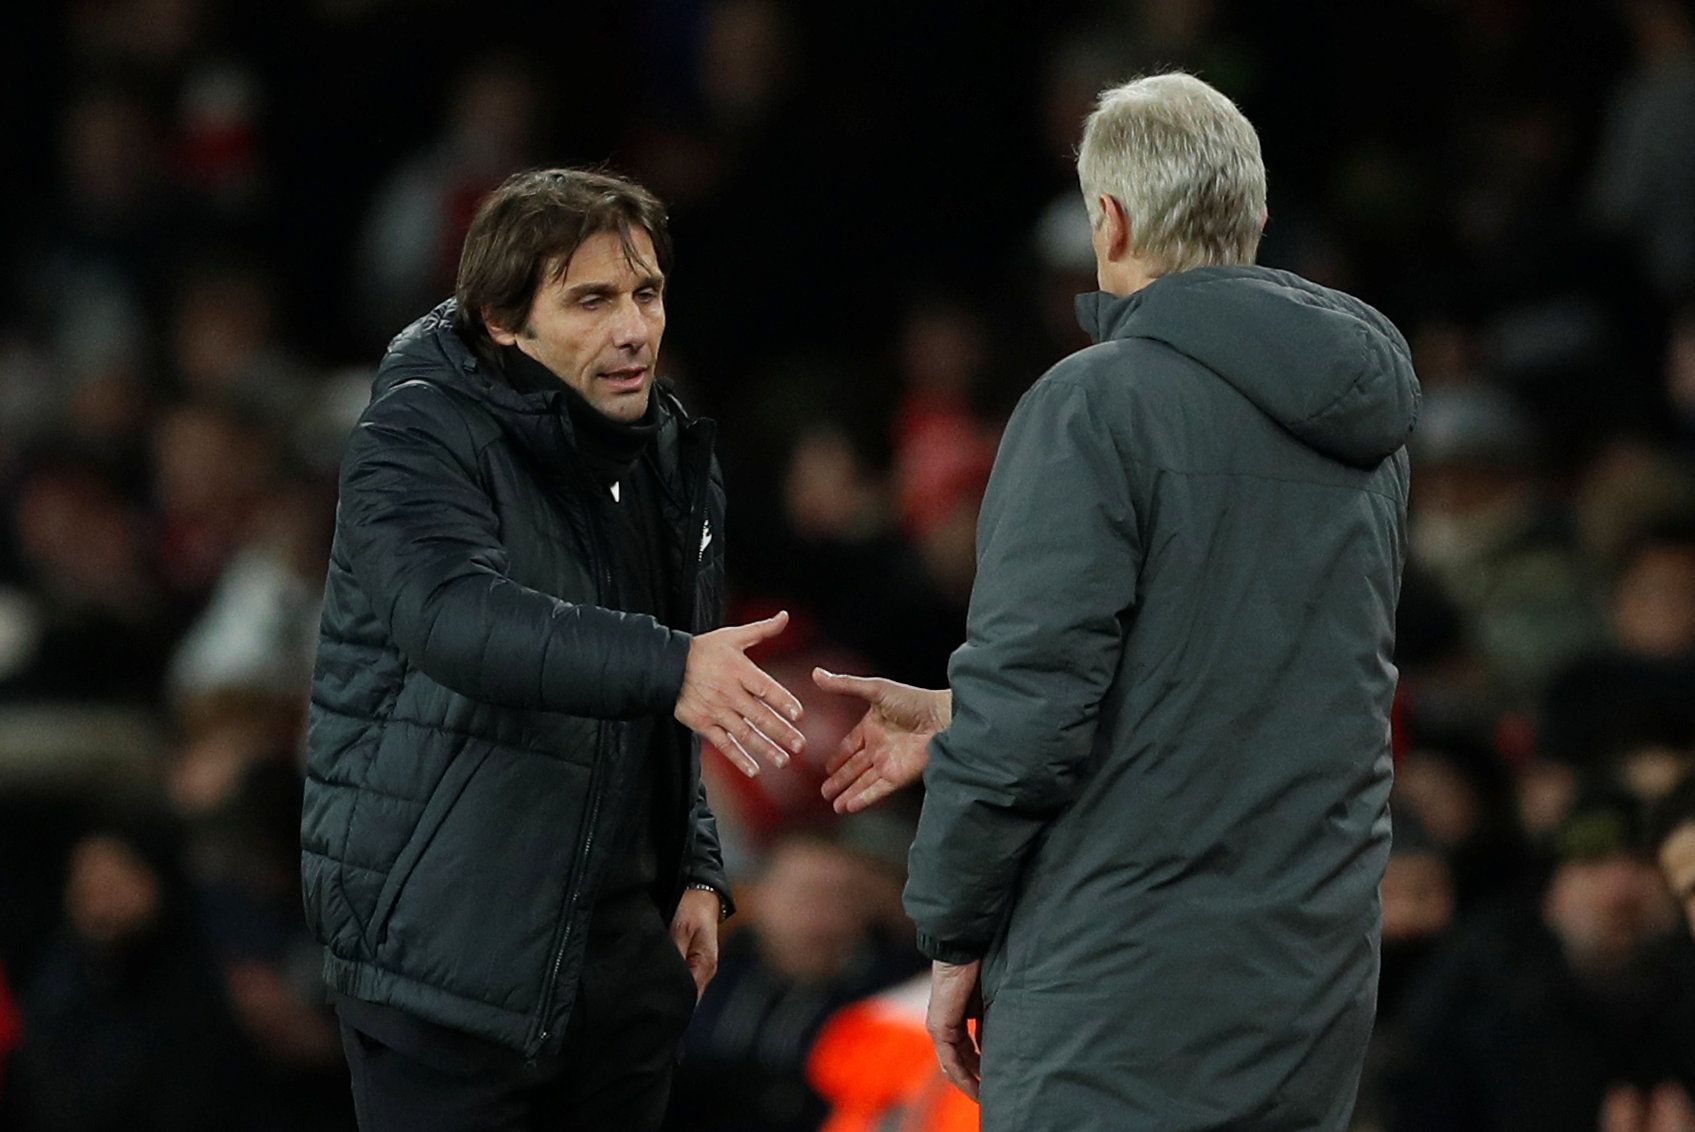 Soccer Football - Premier League - Arsenal vs Chelsea - Emirates Stadium, London, Britain - January 3, 2018   Chelsea manager Antonio Conte shakes hands with Arsenal manager Arsene Wenger after the match    Action Images via Reuters/John Sibley    EDITORIAL USE ONLY. No use with unauthorized audio, video, data, fixture lists, club/league logos or 